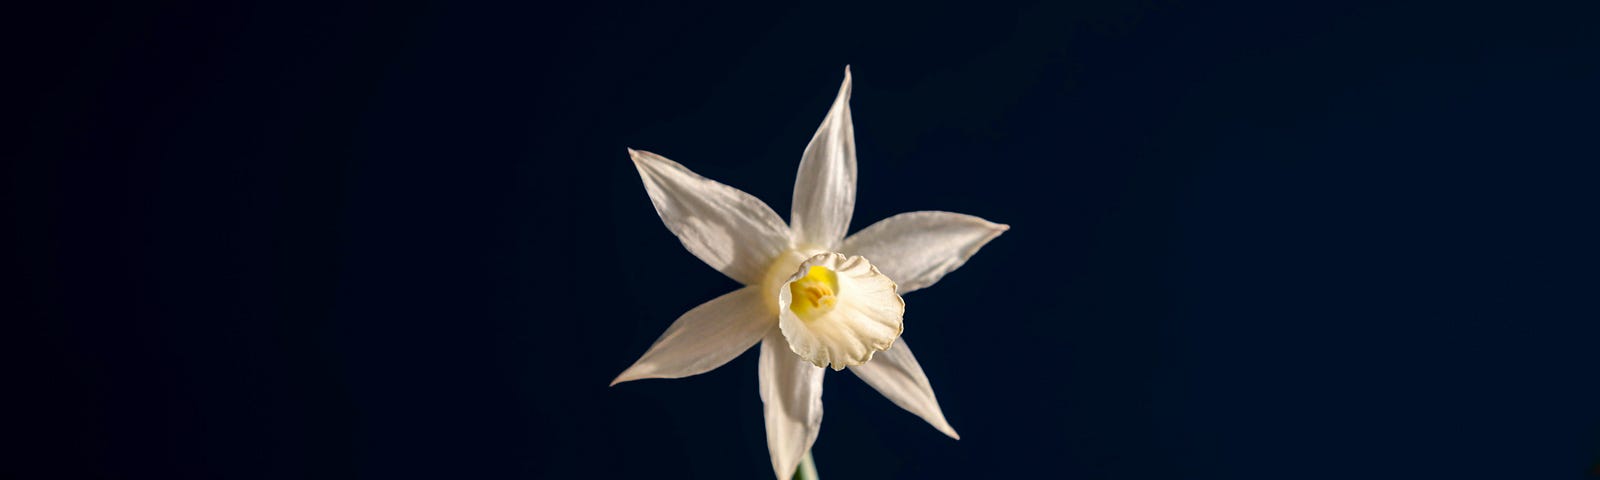 A simple image of a white flower on a black background